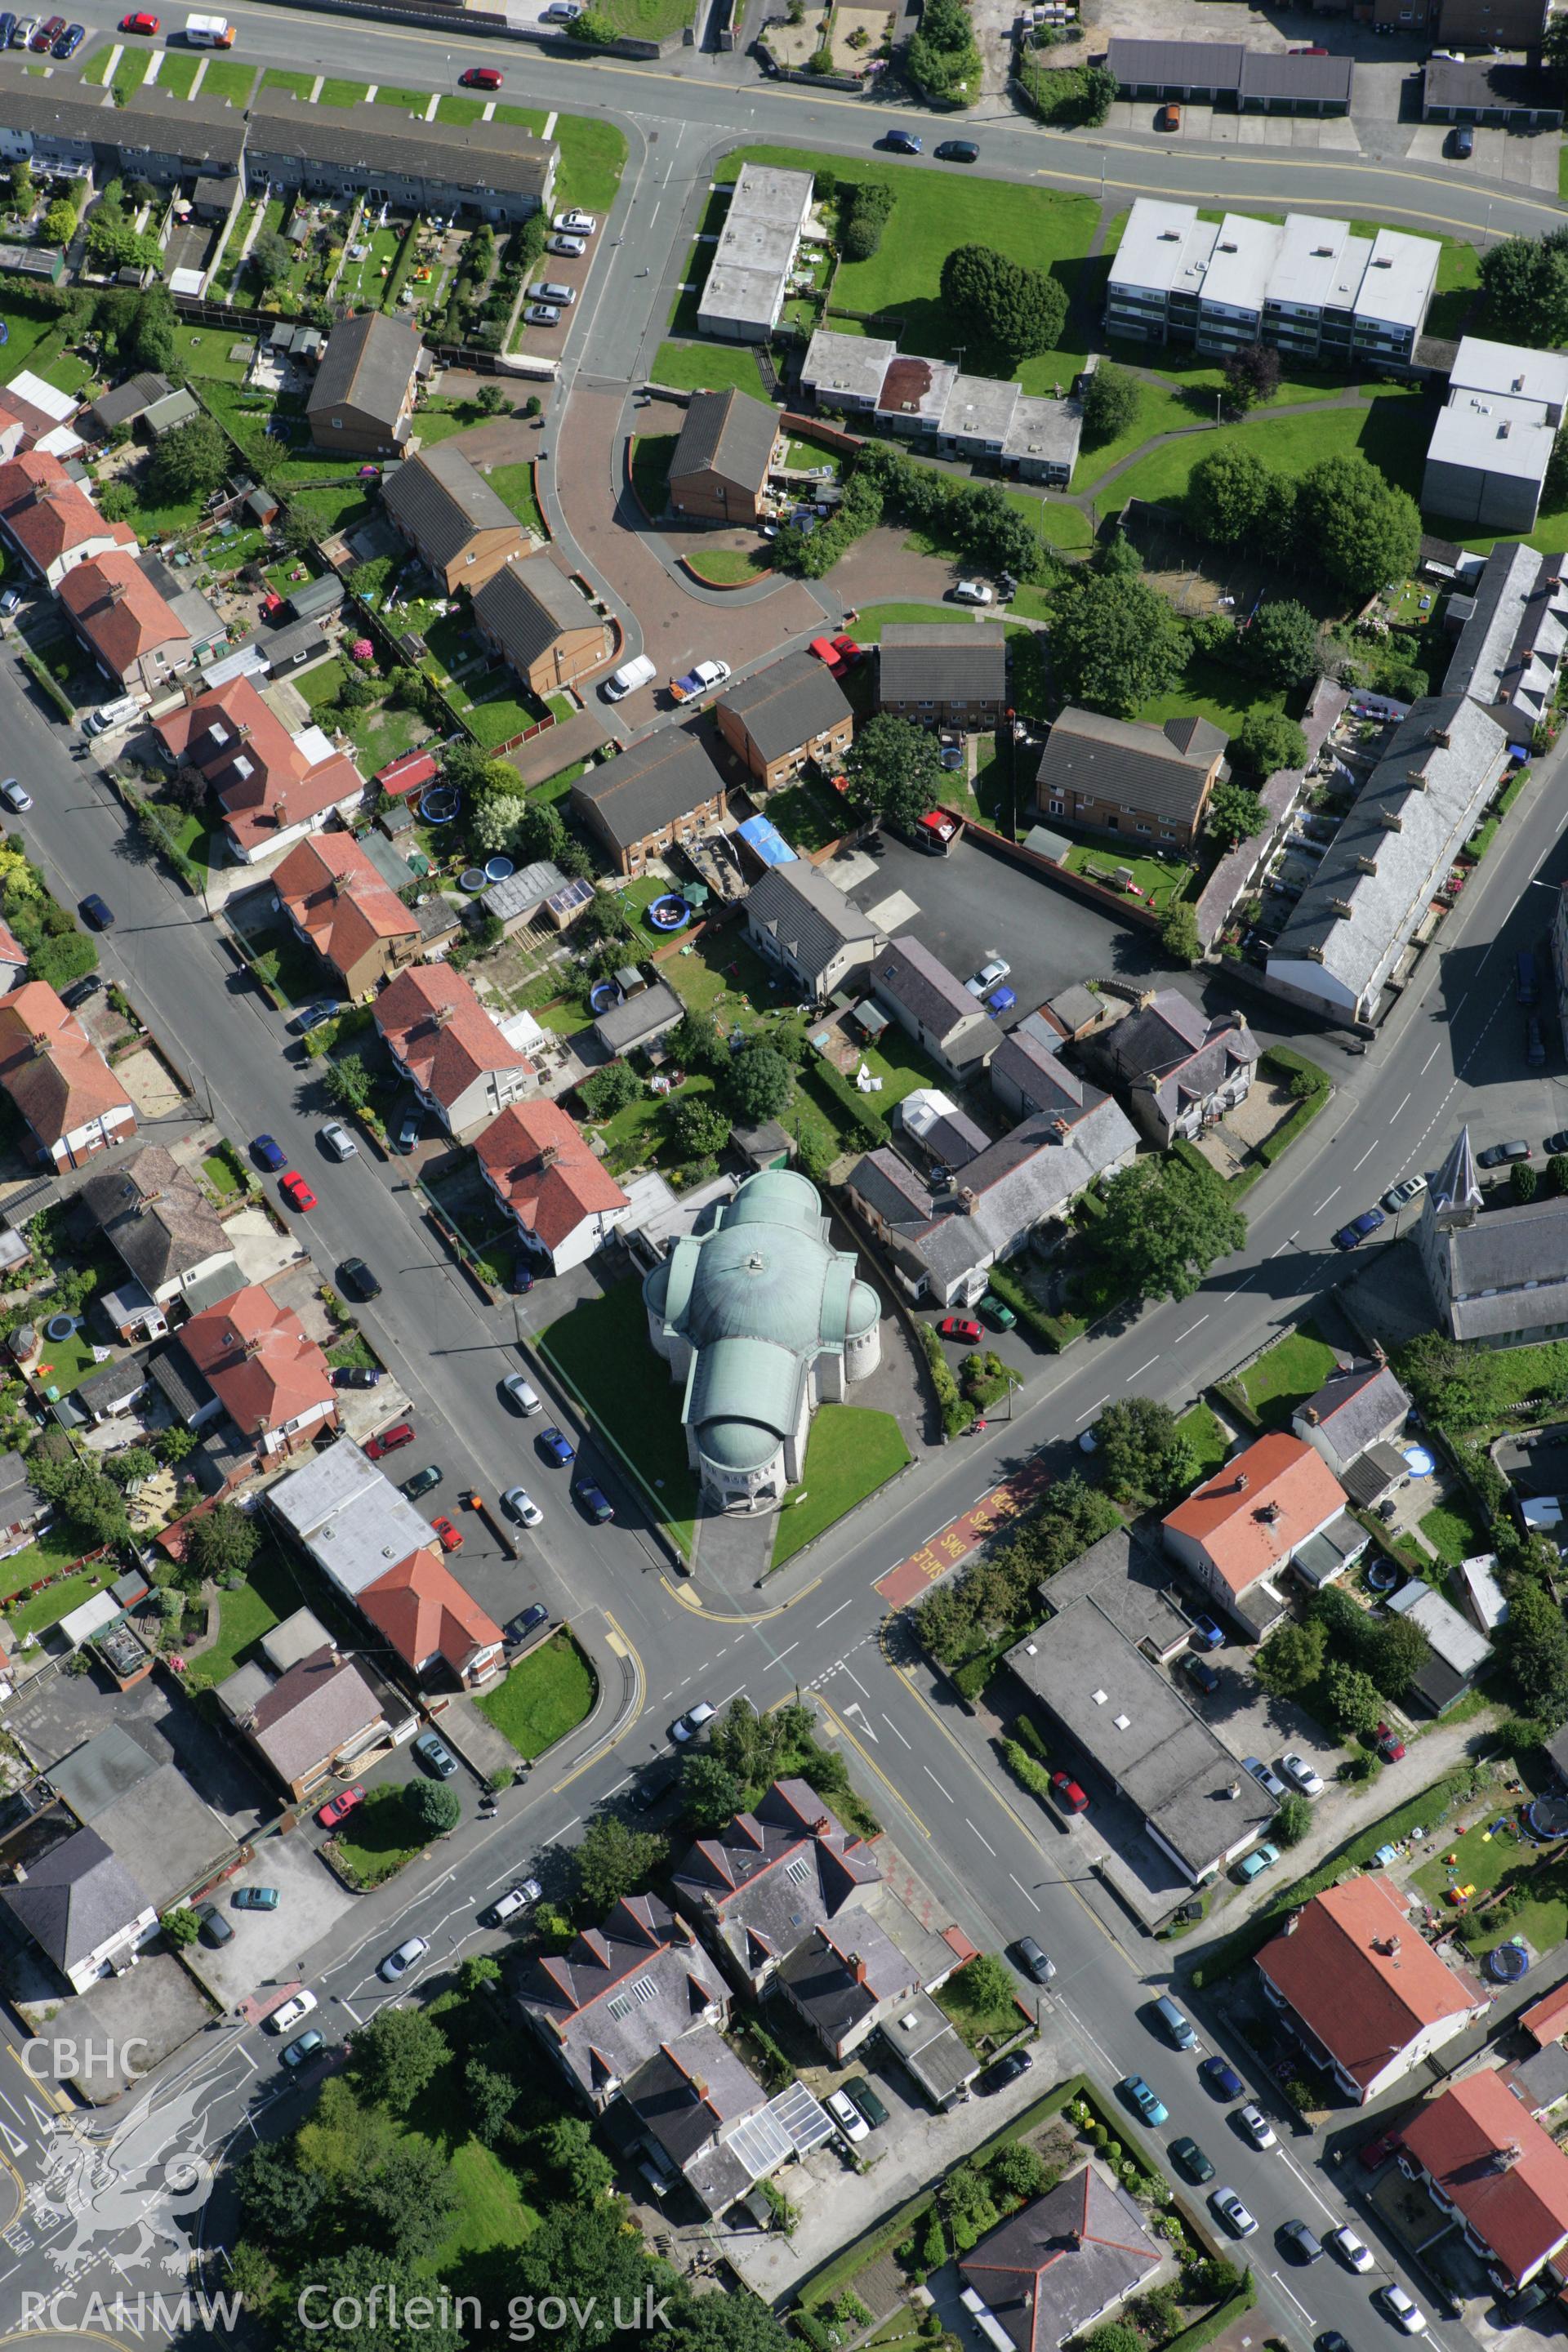 RCAHMW colour oblique aerial photograph of Abergele with the Catholic church visible. Taken on 31 July 2007 by Toby Driver